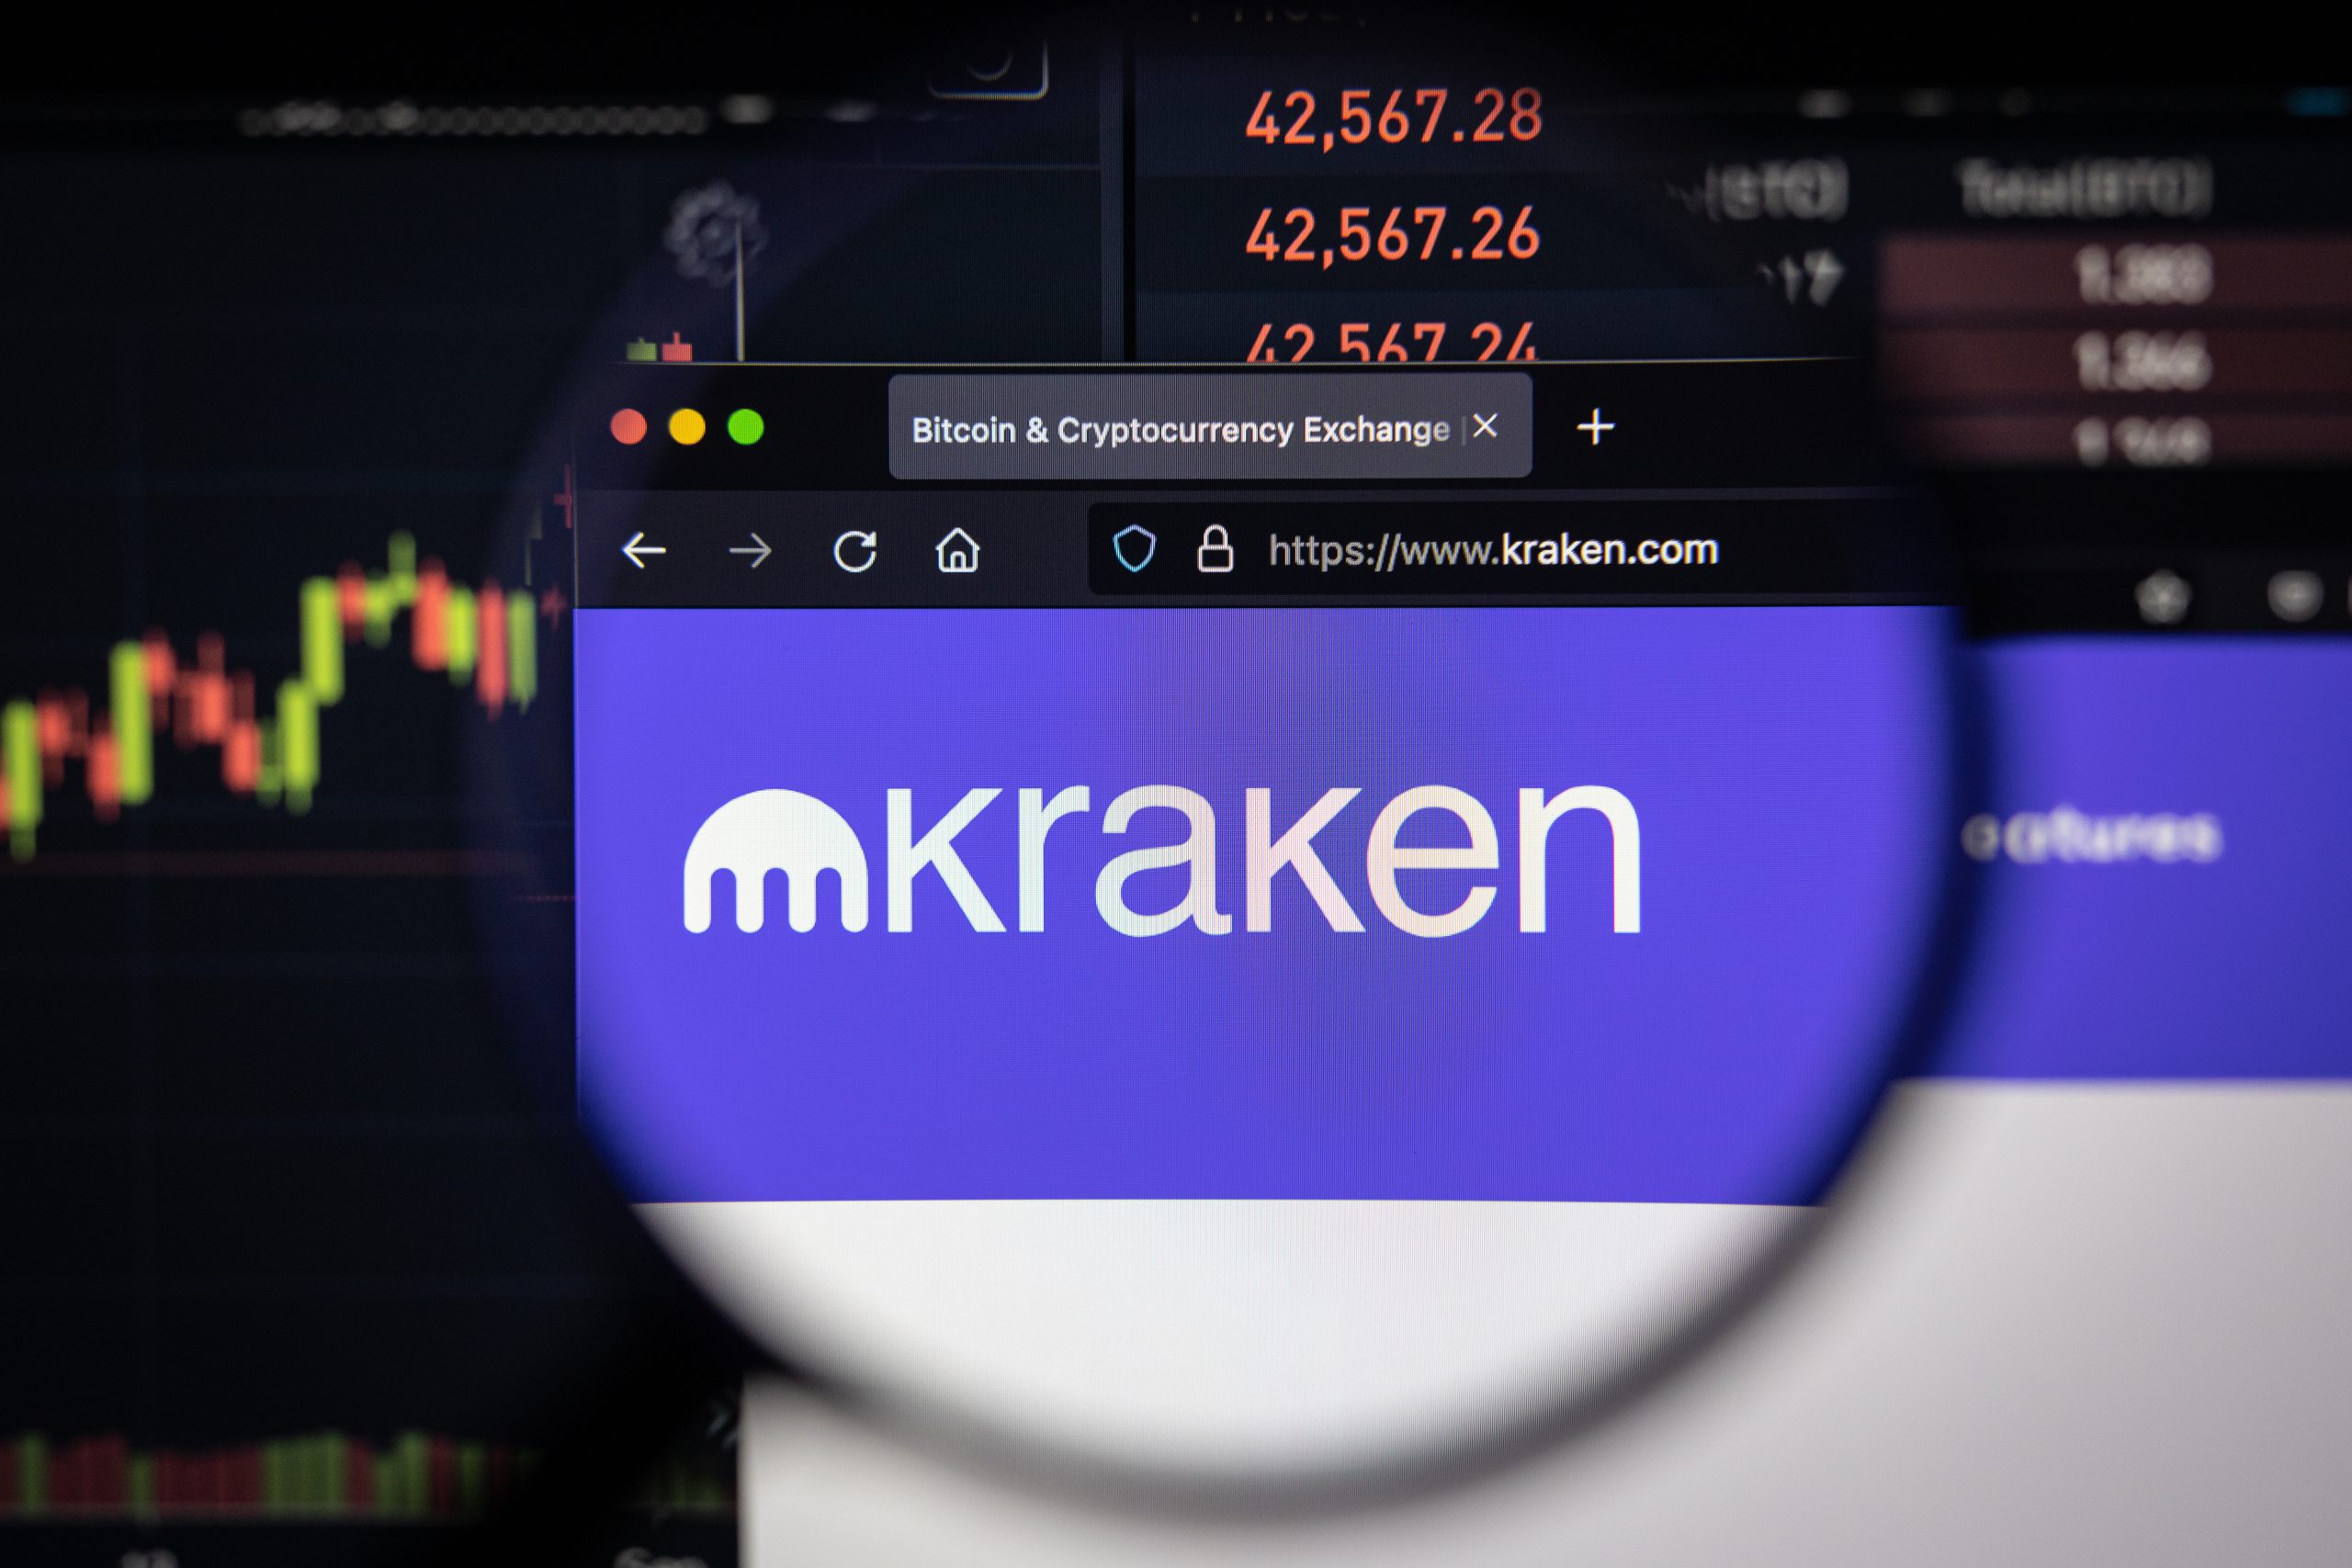 Upcoming Kraken CEO: We have no plans to register with SEC
